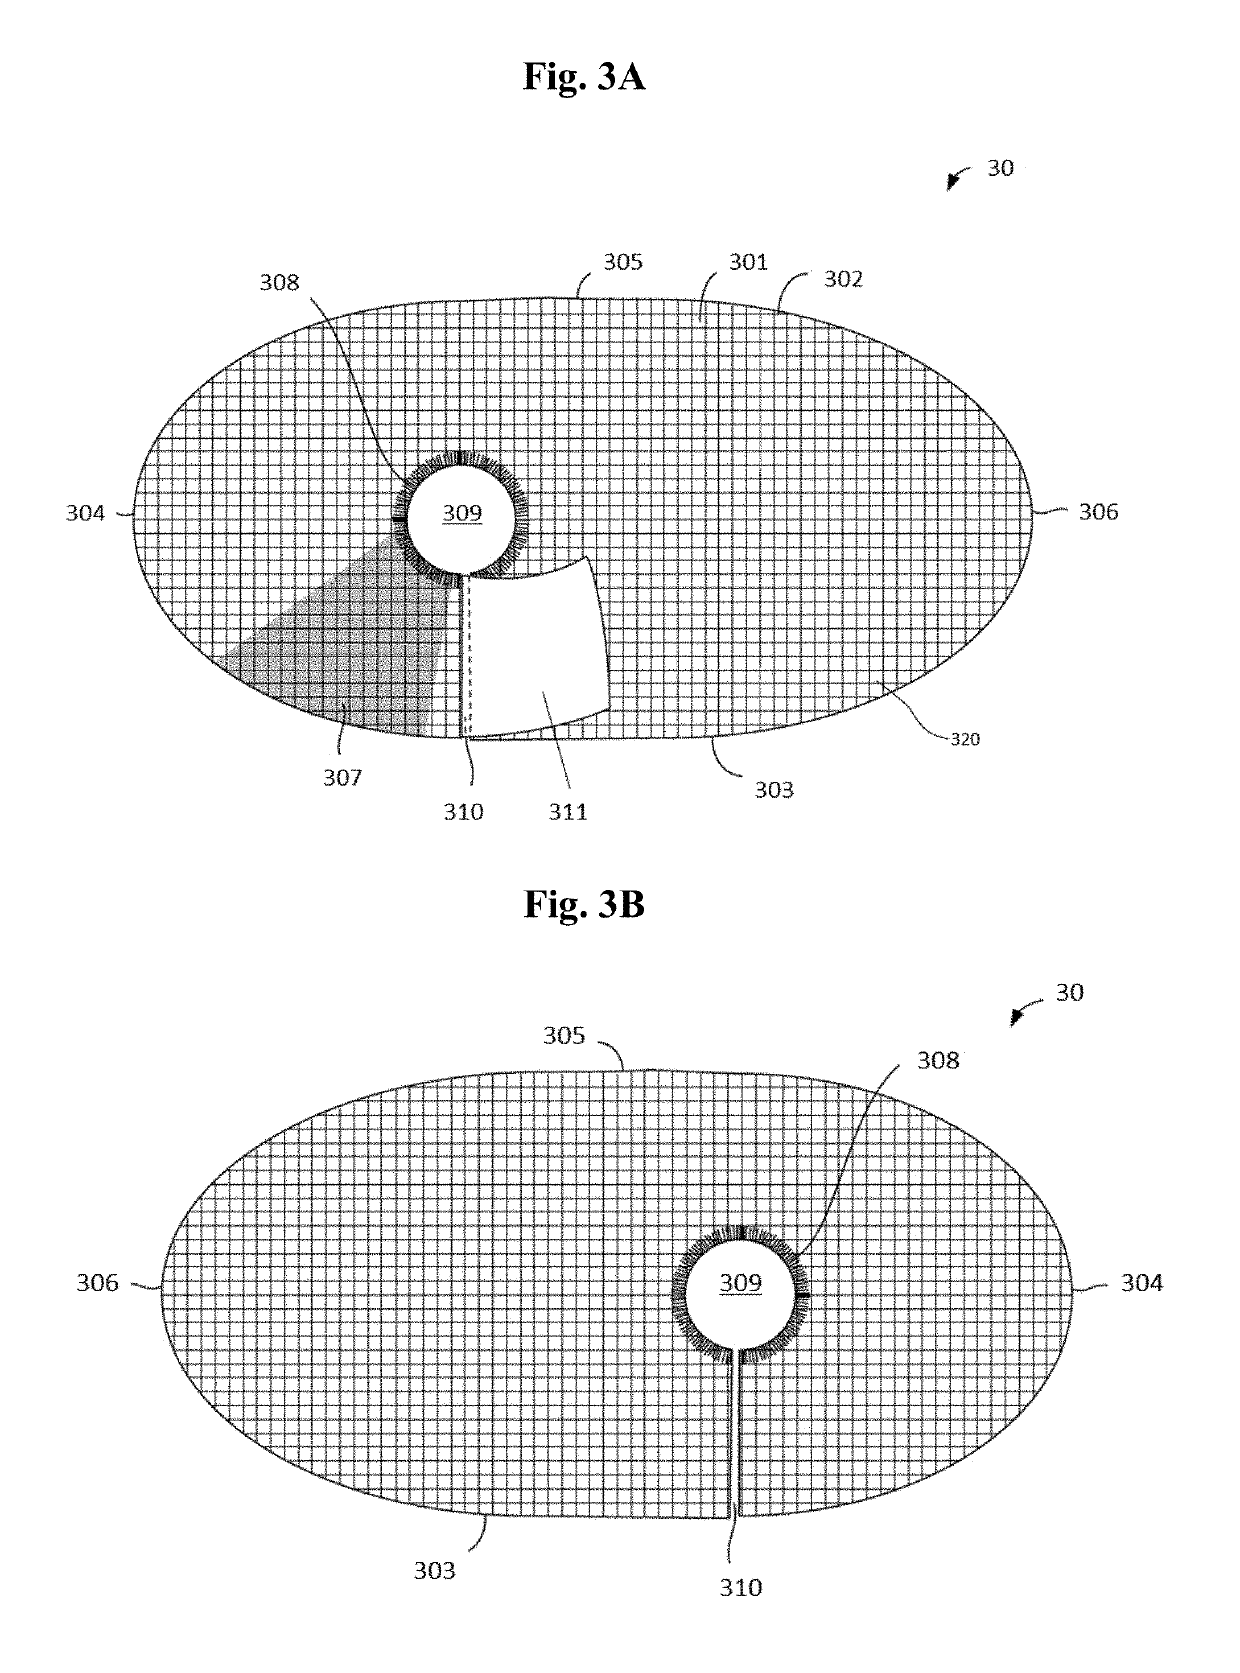 Gender-specific mesh implant with barrier for inguinal hernia repair